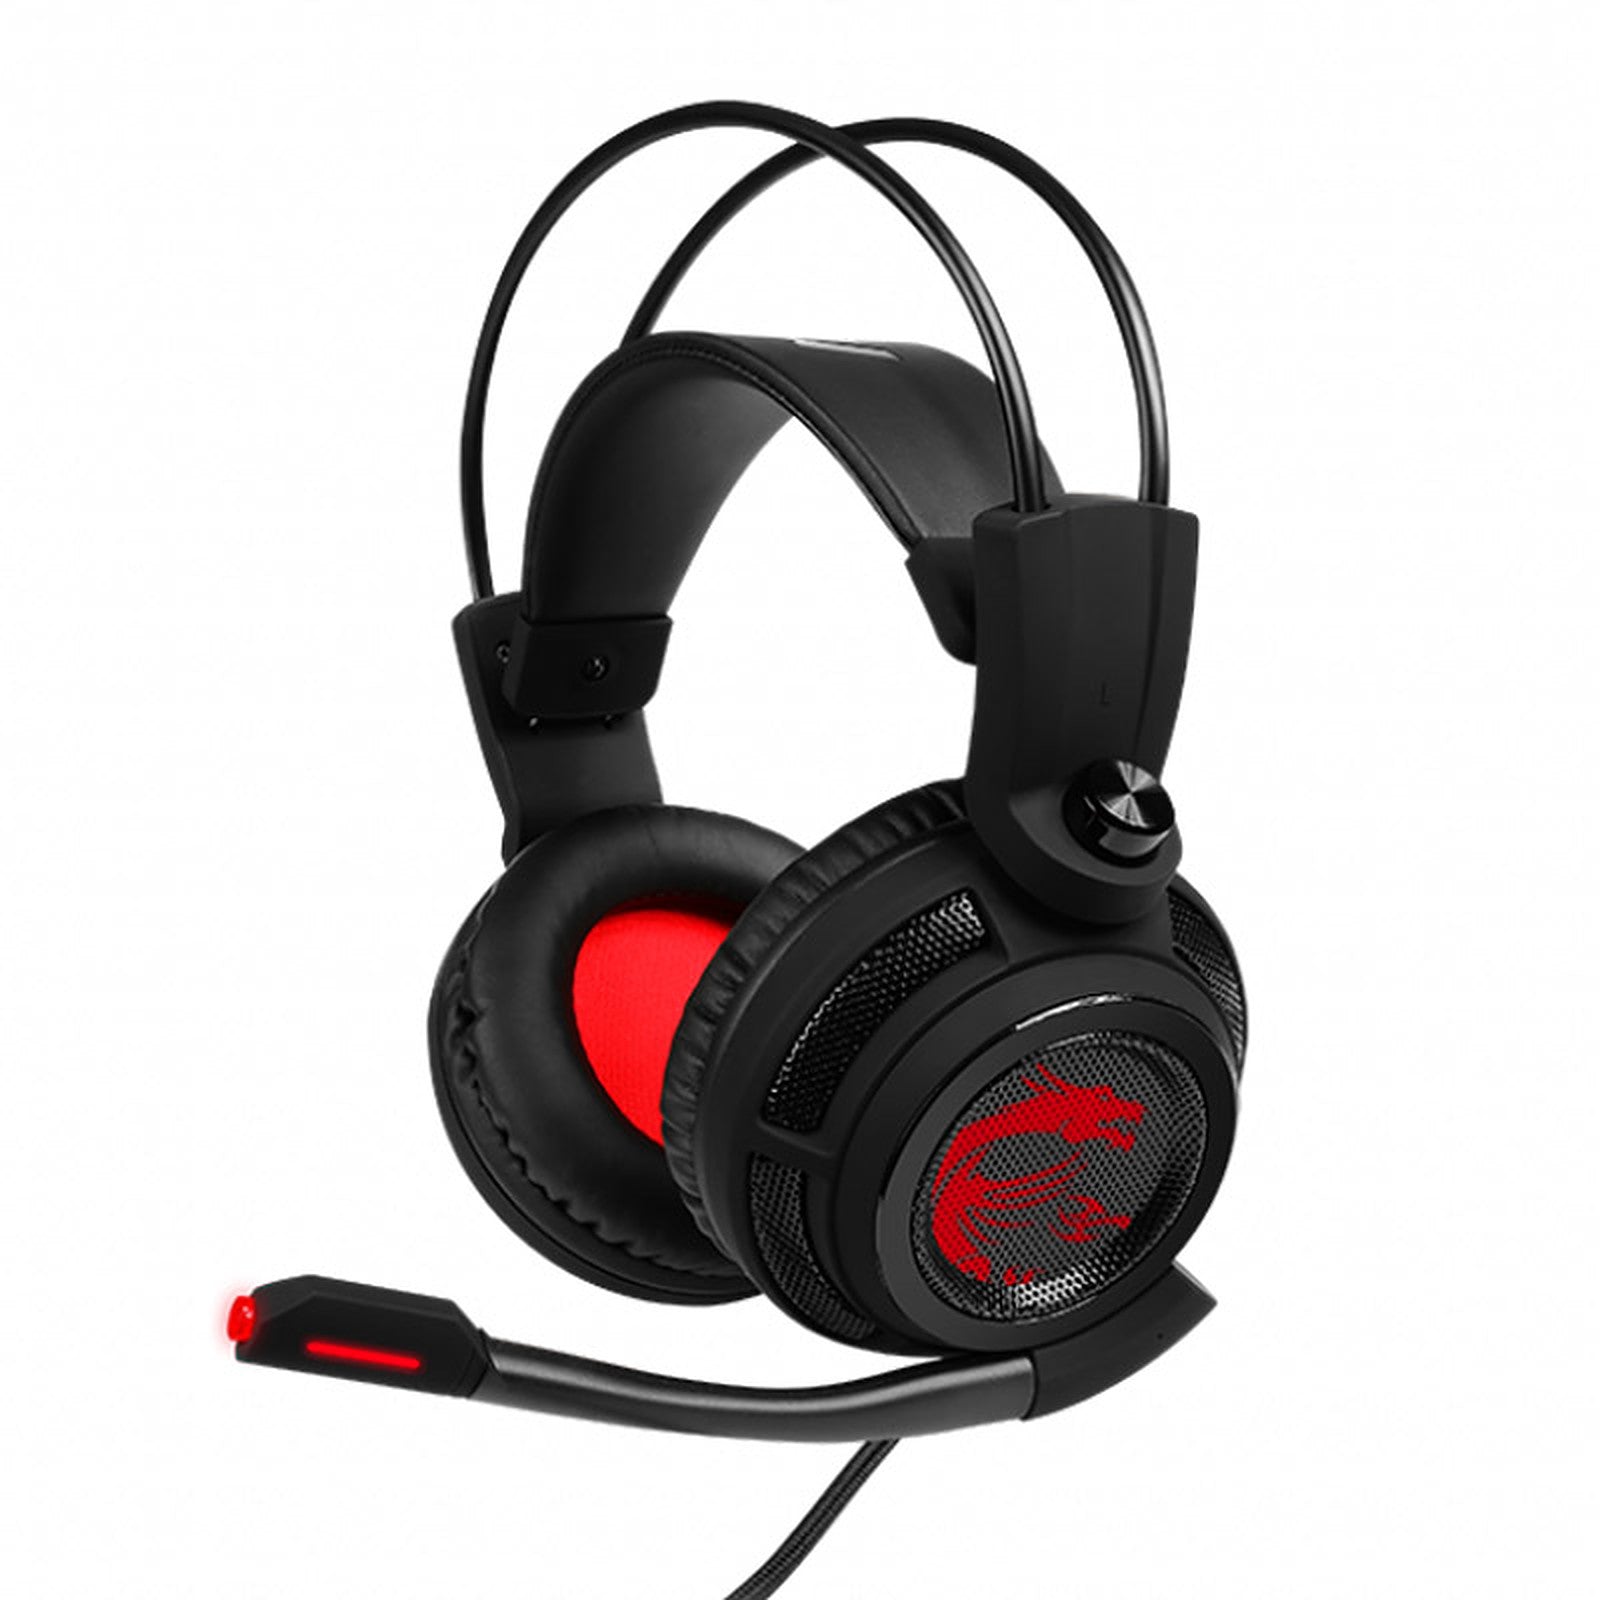 MSI CUFFIE HEADSET GAMING DS502, VIRTUAL 7.1 SURROUND, USB IN-LINE CONTROLLER, MICROFONO R